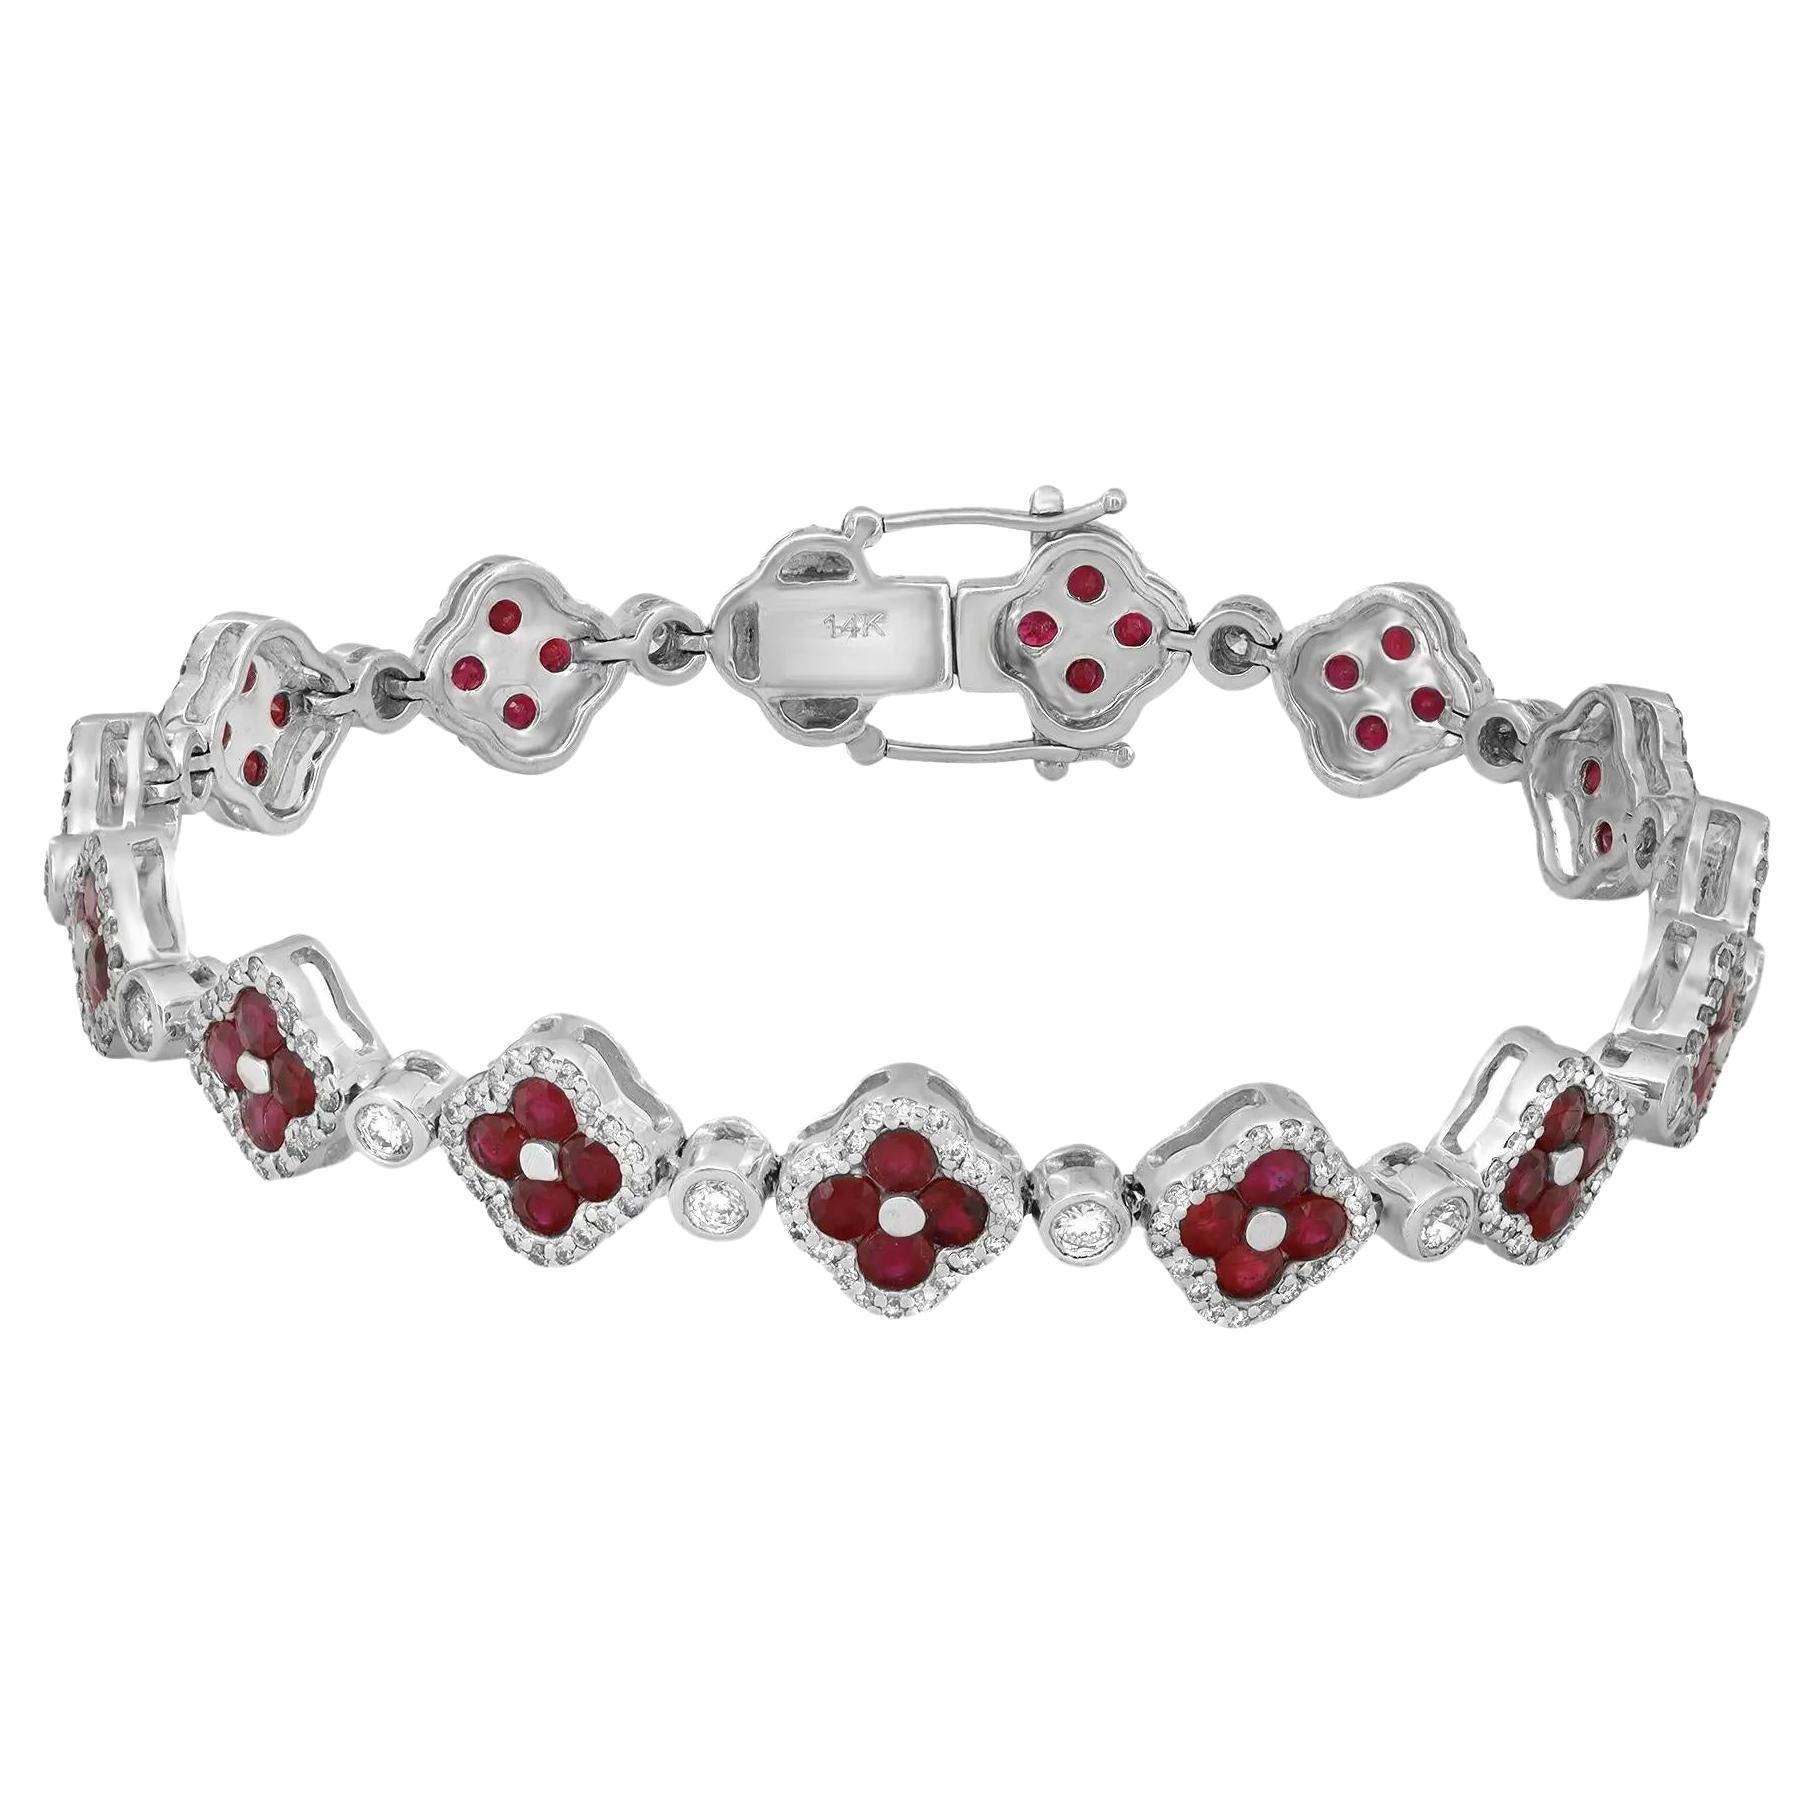 Ruby 5.21Cttw And Diamond 1.84Cttw Clover Tennis Bracelet 14K White Gold 7.2 In